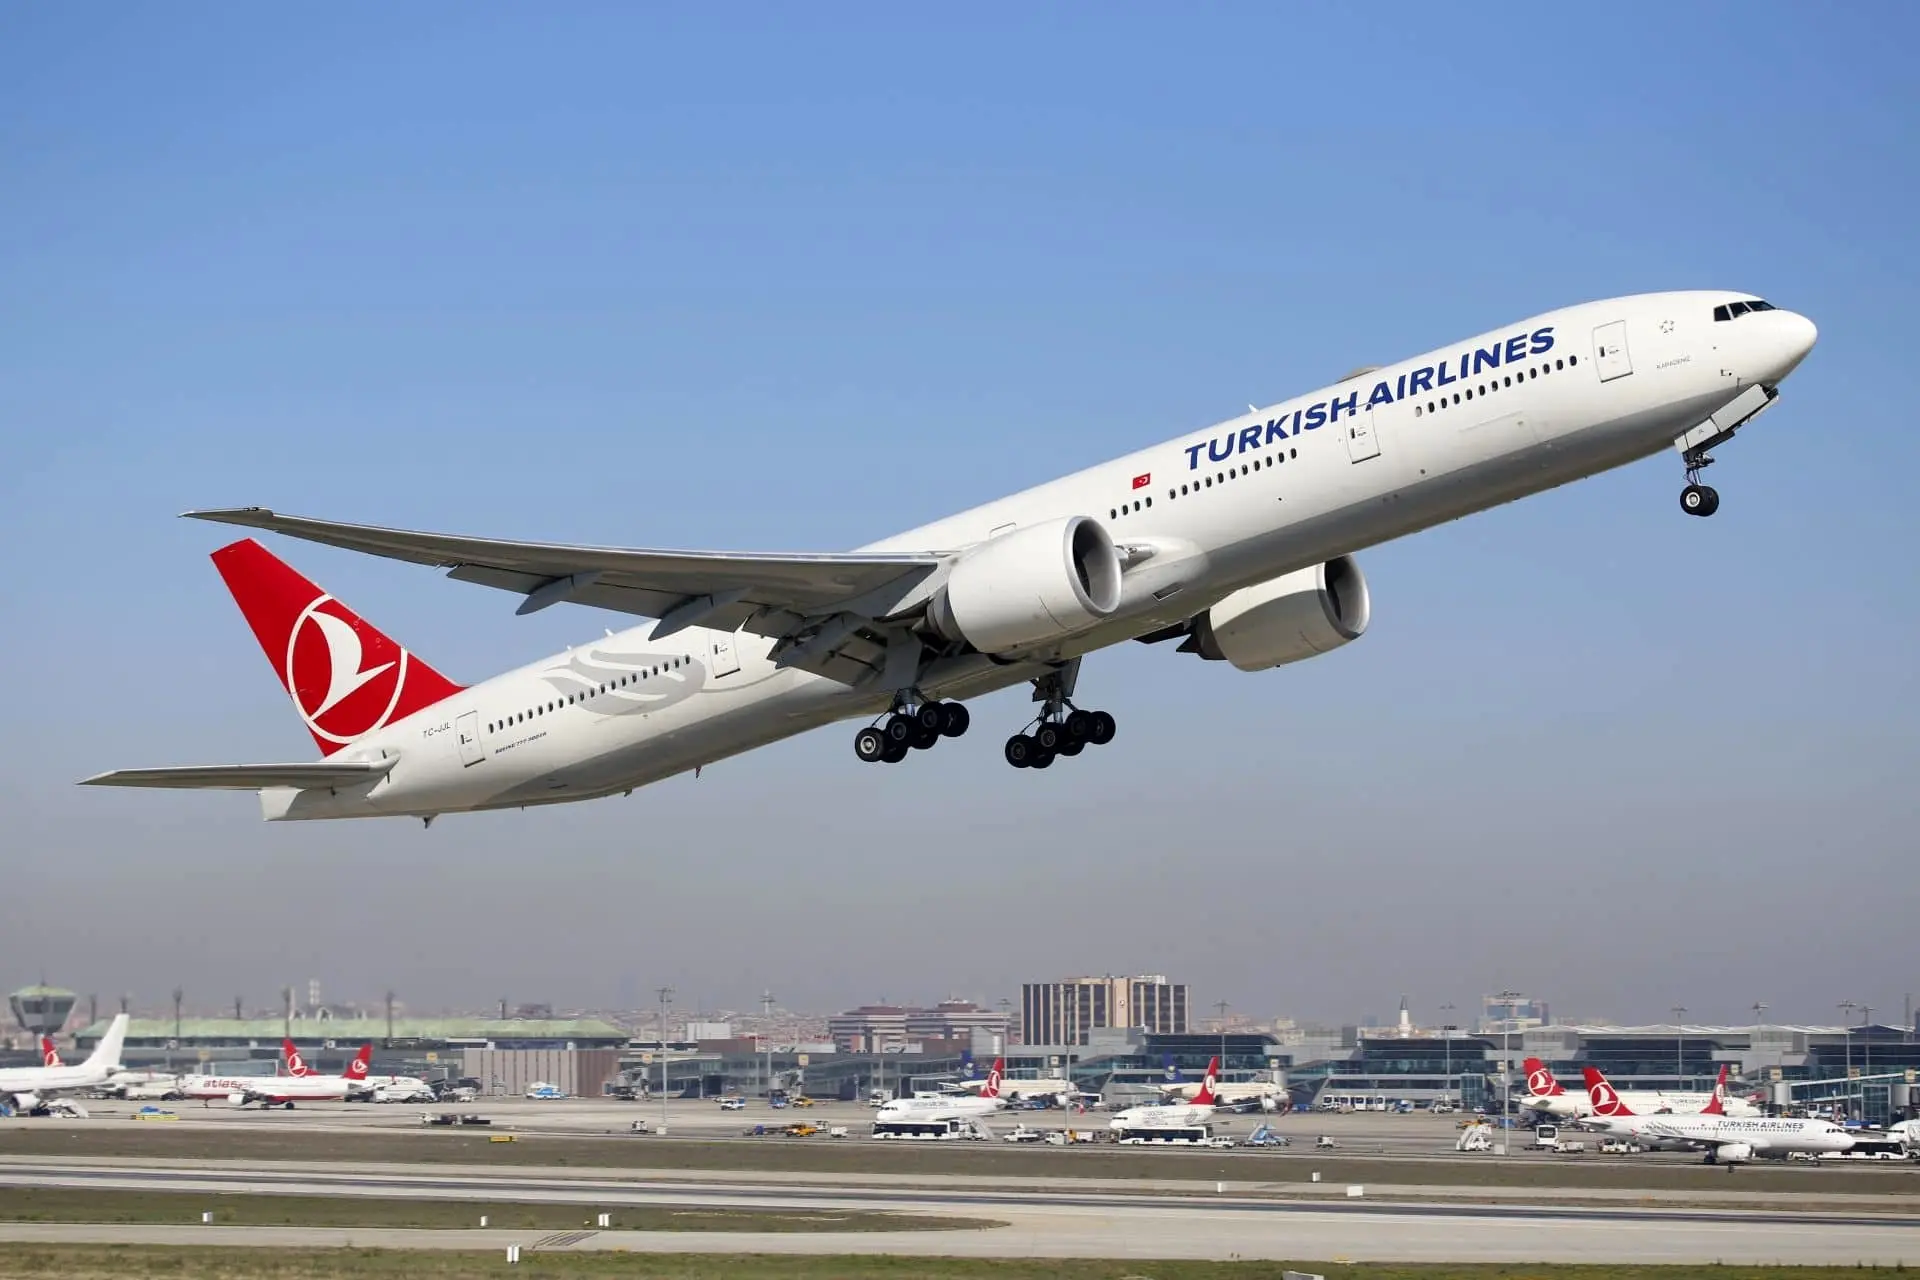 Turkish Airlines reached the 80.2% load factor in December 2018